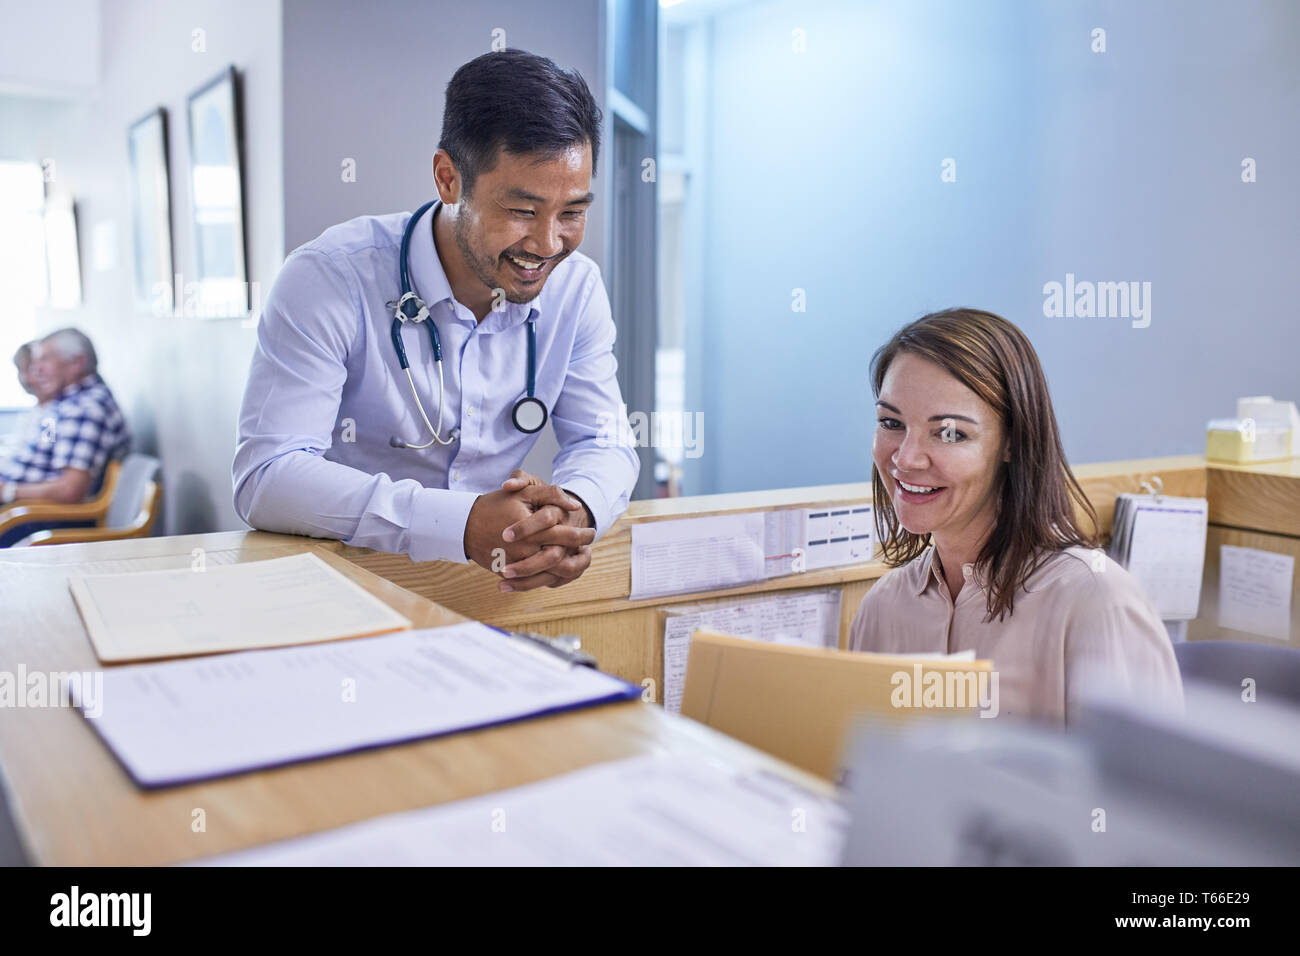 Smiling doctor and receptionist discussing medical record in clinic Stock Photo